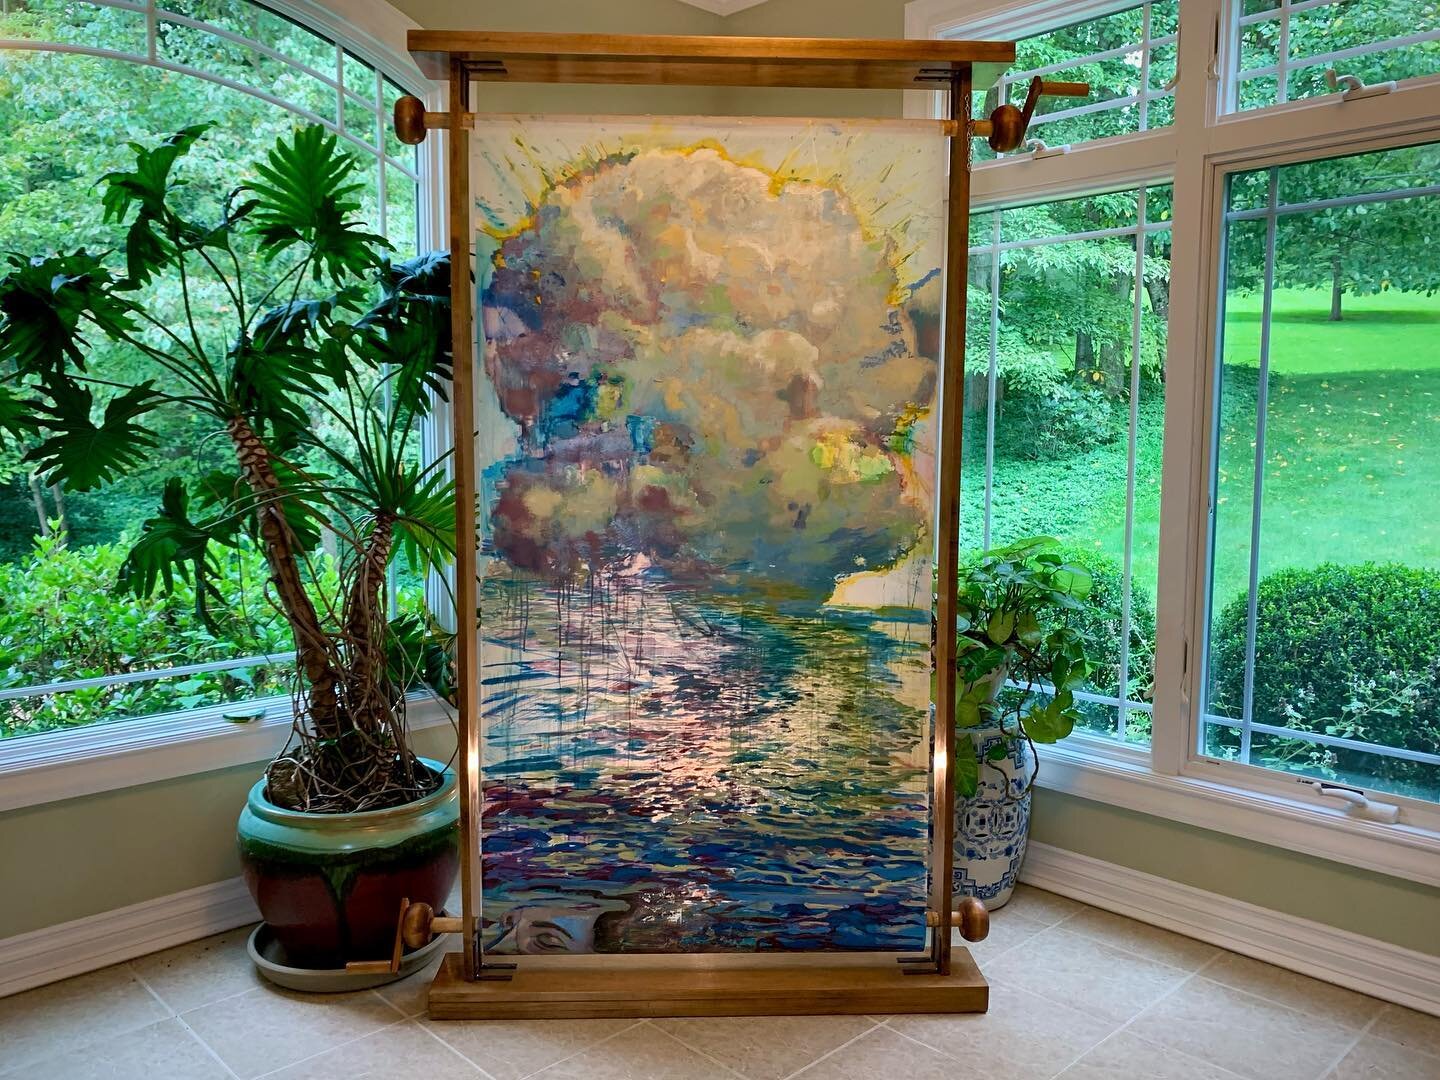 This is a free-standing double sided scroll painting called &quot;Cloud. 2016&quot;
SIZE -  Frame: 39.5&quot; x 76&quot; 
&bull;
&bull;
&bull;
#scrollpainting #japanesescroll #paintingclouds #cloudspainting #cloudscapepainting #cloudpaintings #cloudp